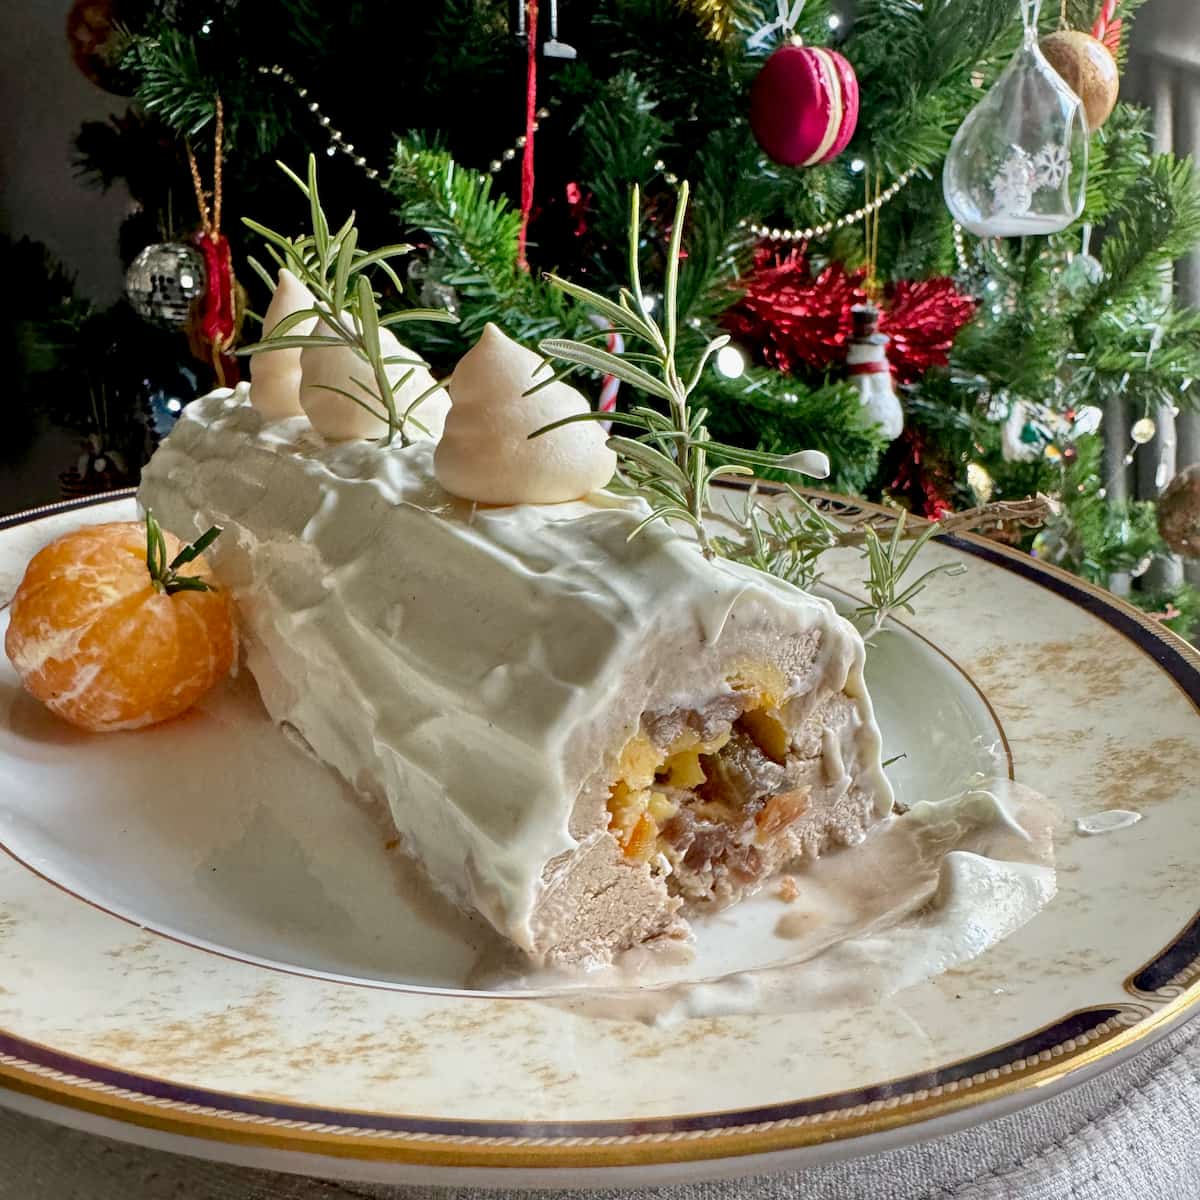 ice cream log filled with candied chestnuts and orange and topped with meringue